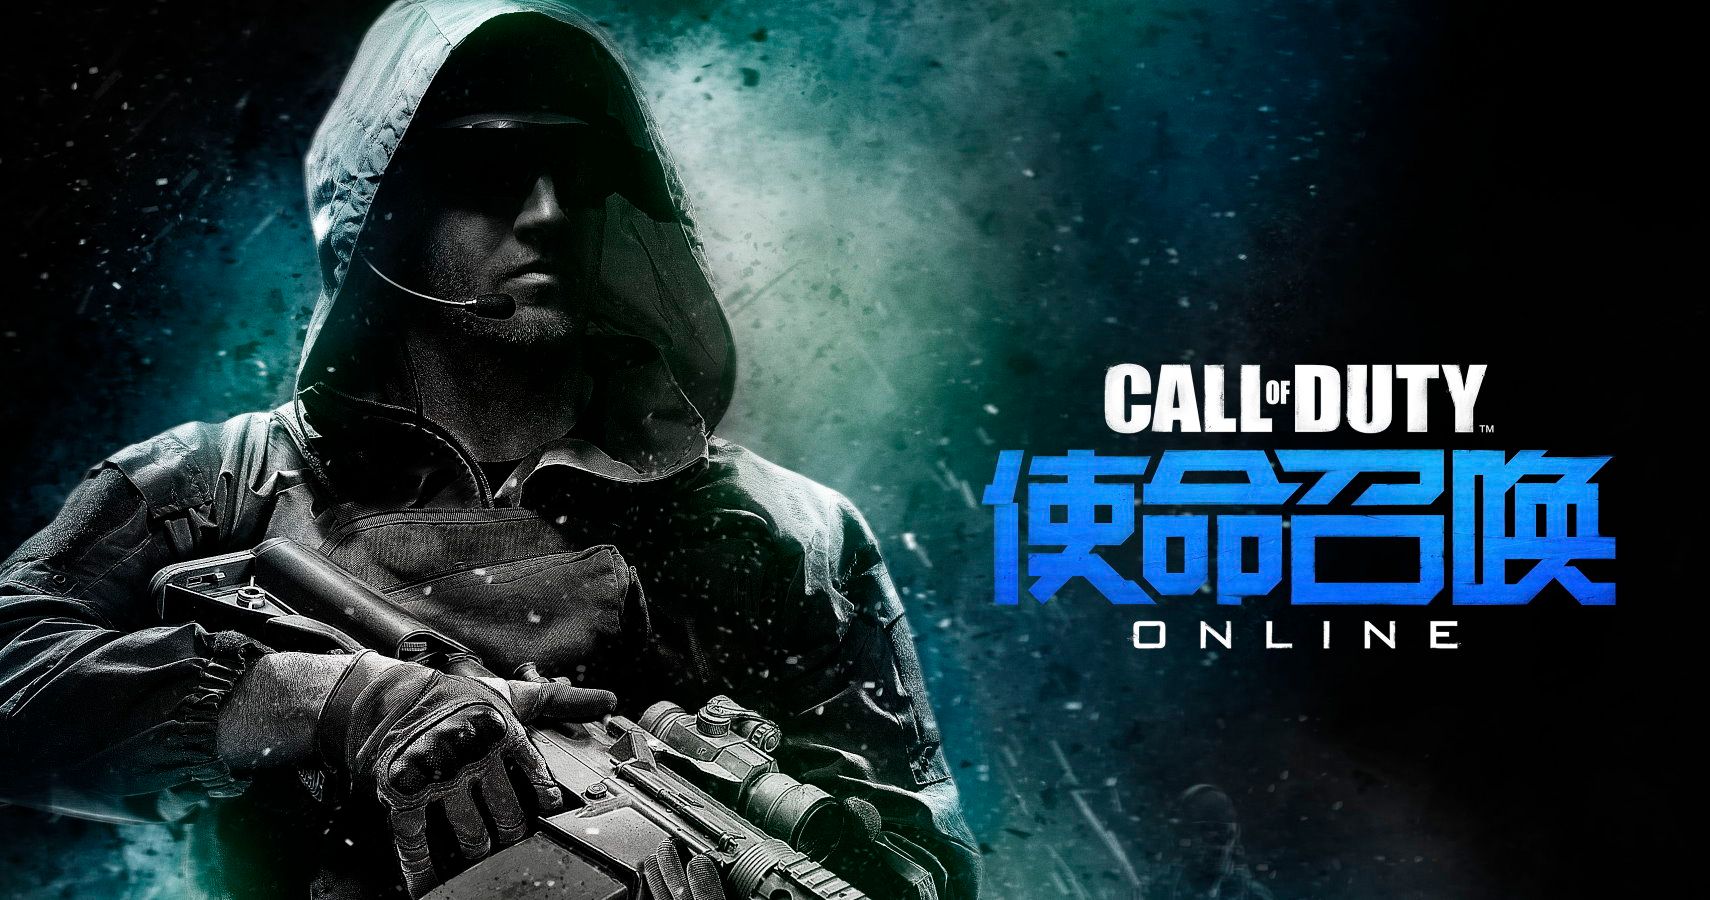 Call Of Duty Online Shutting Down In August, Fans Encouraged To Play Call  Of Duty Mobile Instead